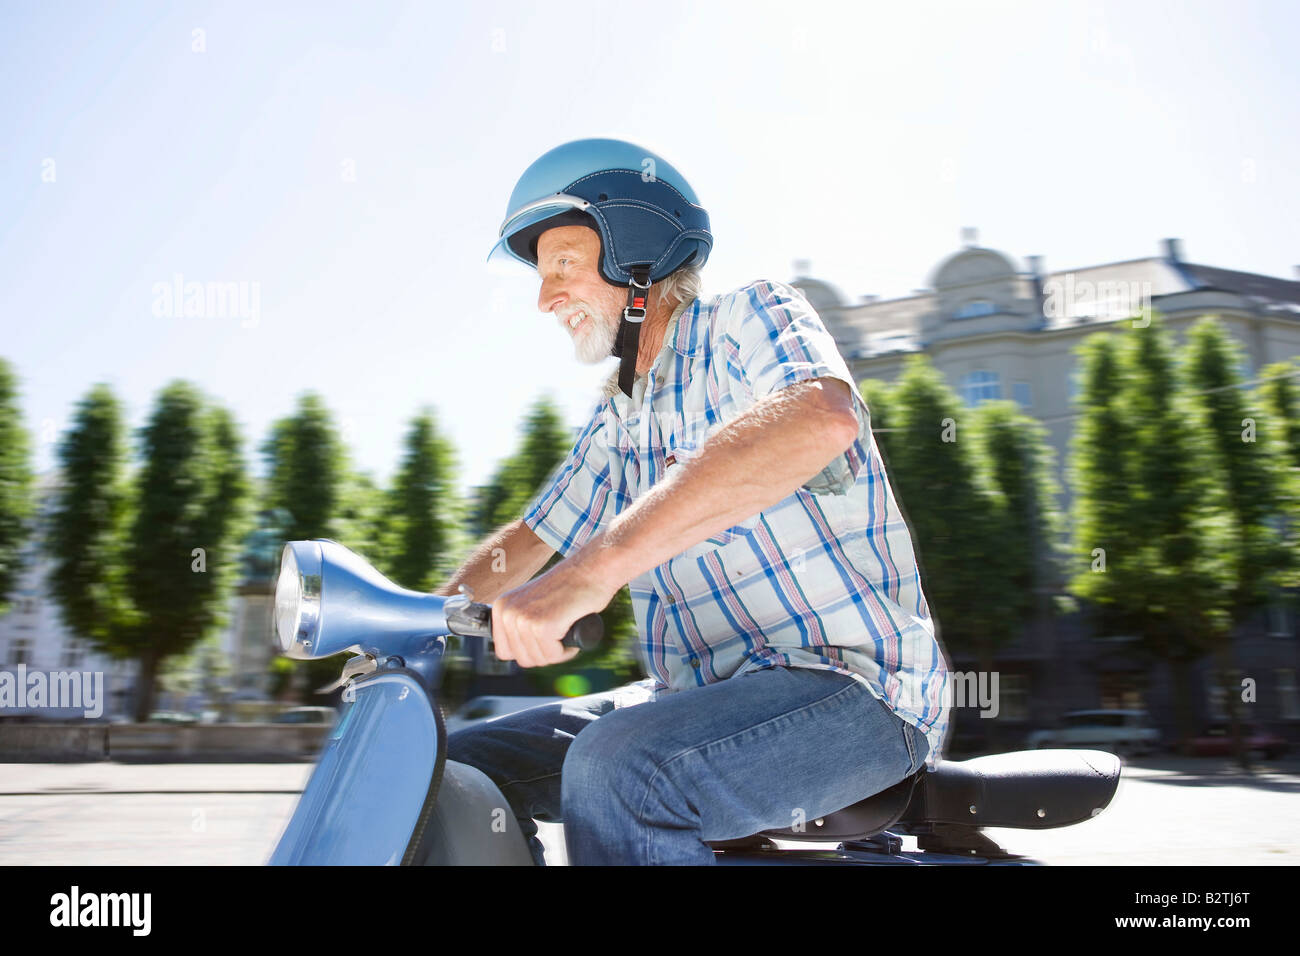 Man on scooter Stock Photo